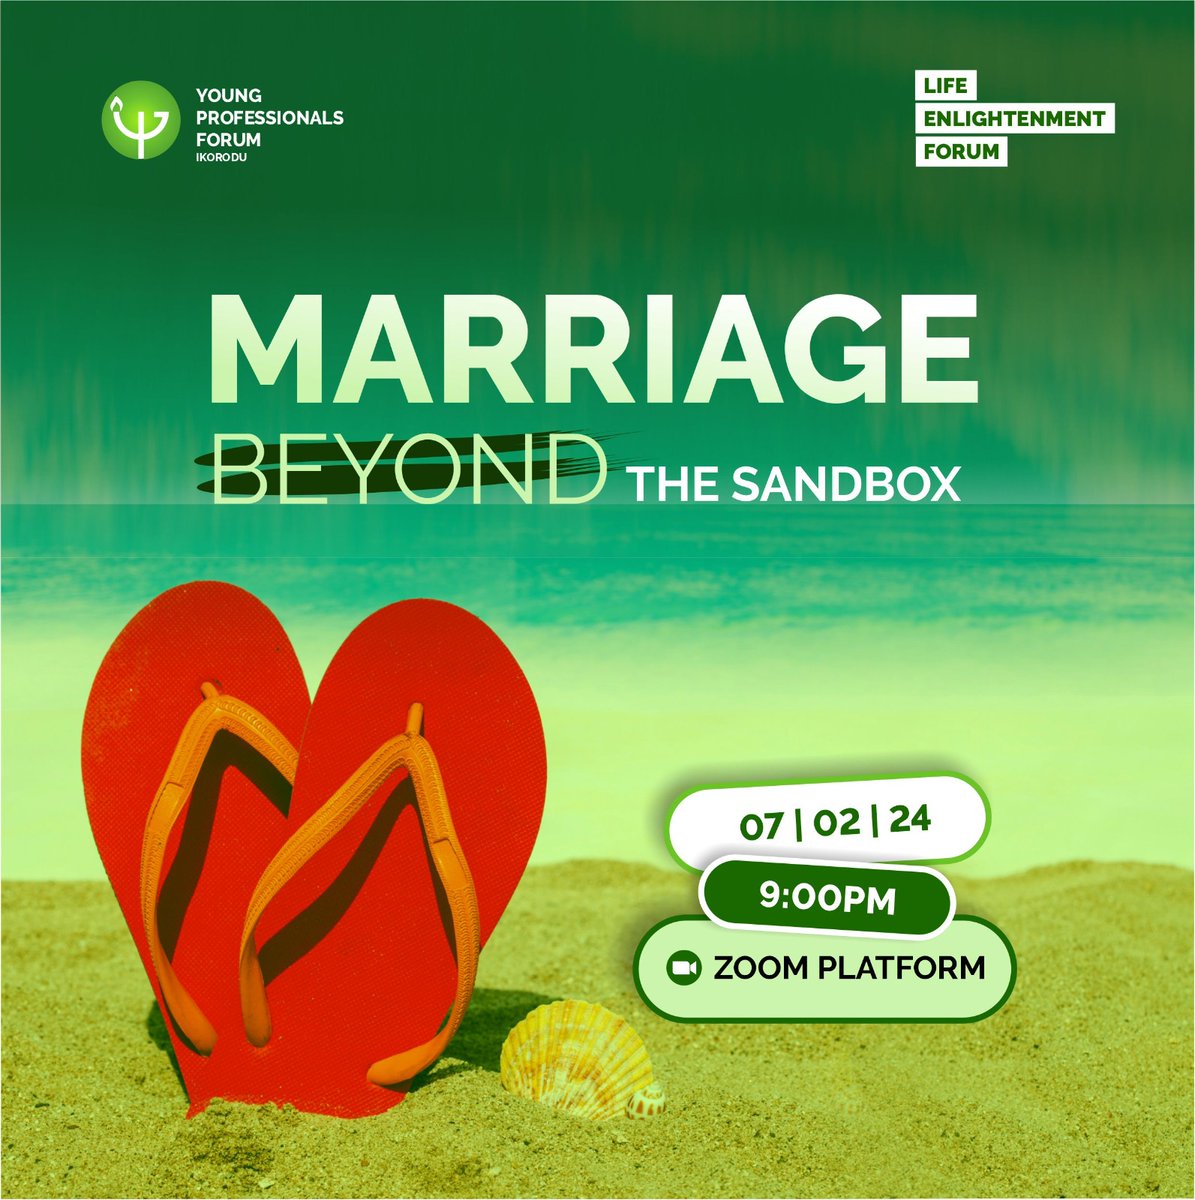 Your marriage partner is your MOST IMPORTANT Marital, Financial, Physical, and Emotional decision... 
Join us as we look into the nitty gritty of Marriage Beyond The SandBox.

Date:Wednesday 7th February 2024

Time: 9:00pm 
Venue: Zoom
#YPFLEF
#BeyondTheSandBox
#GodlyMarrriage